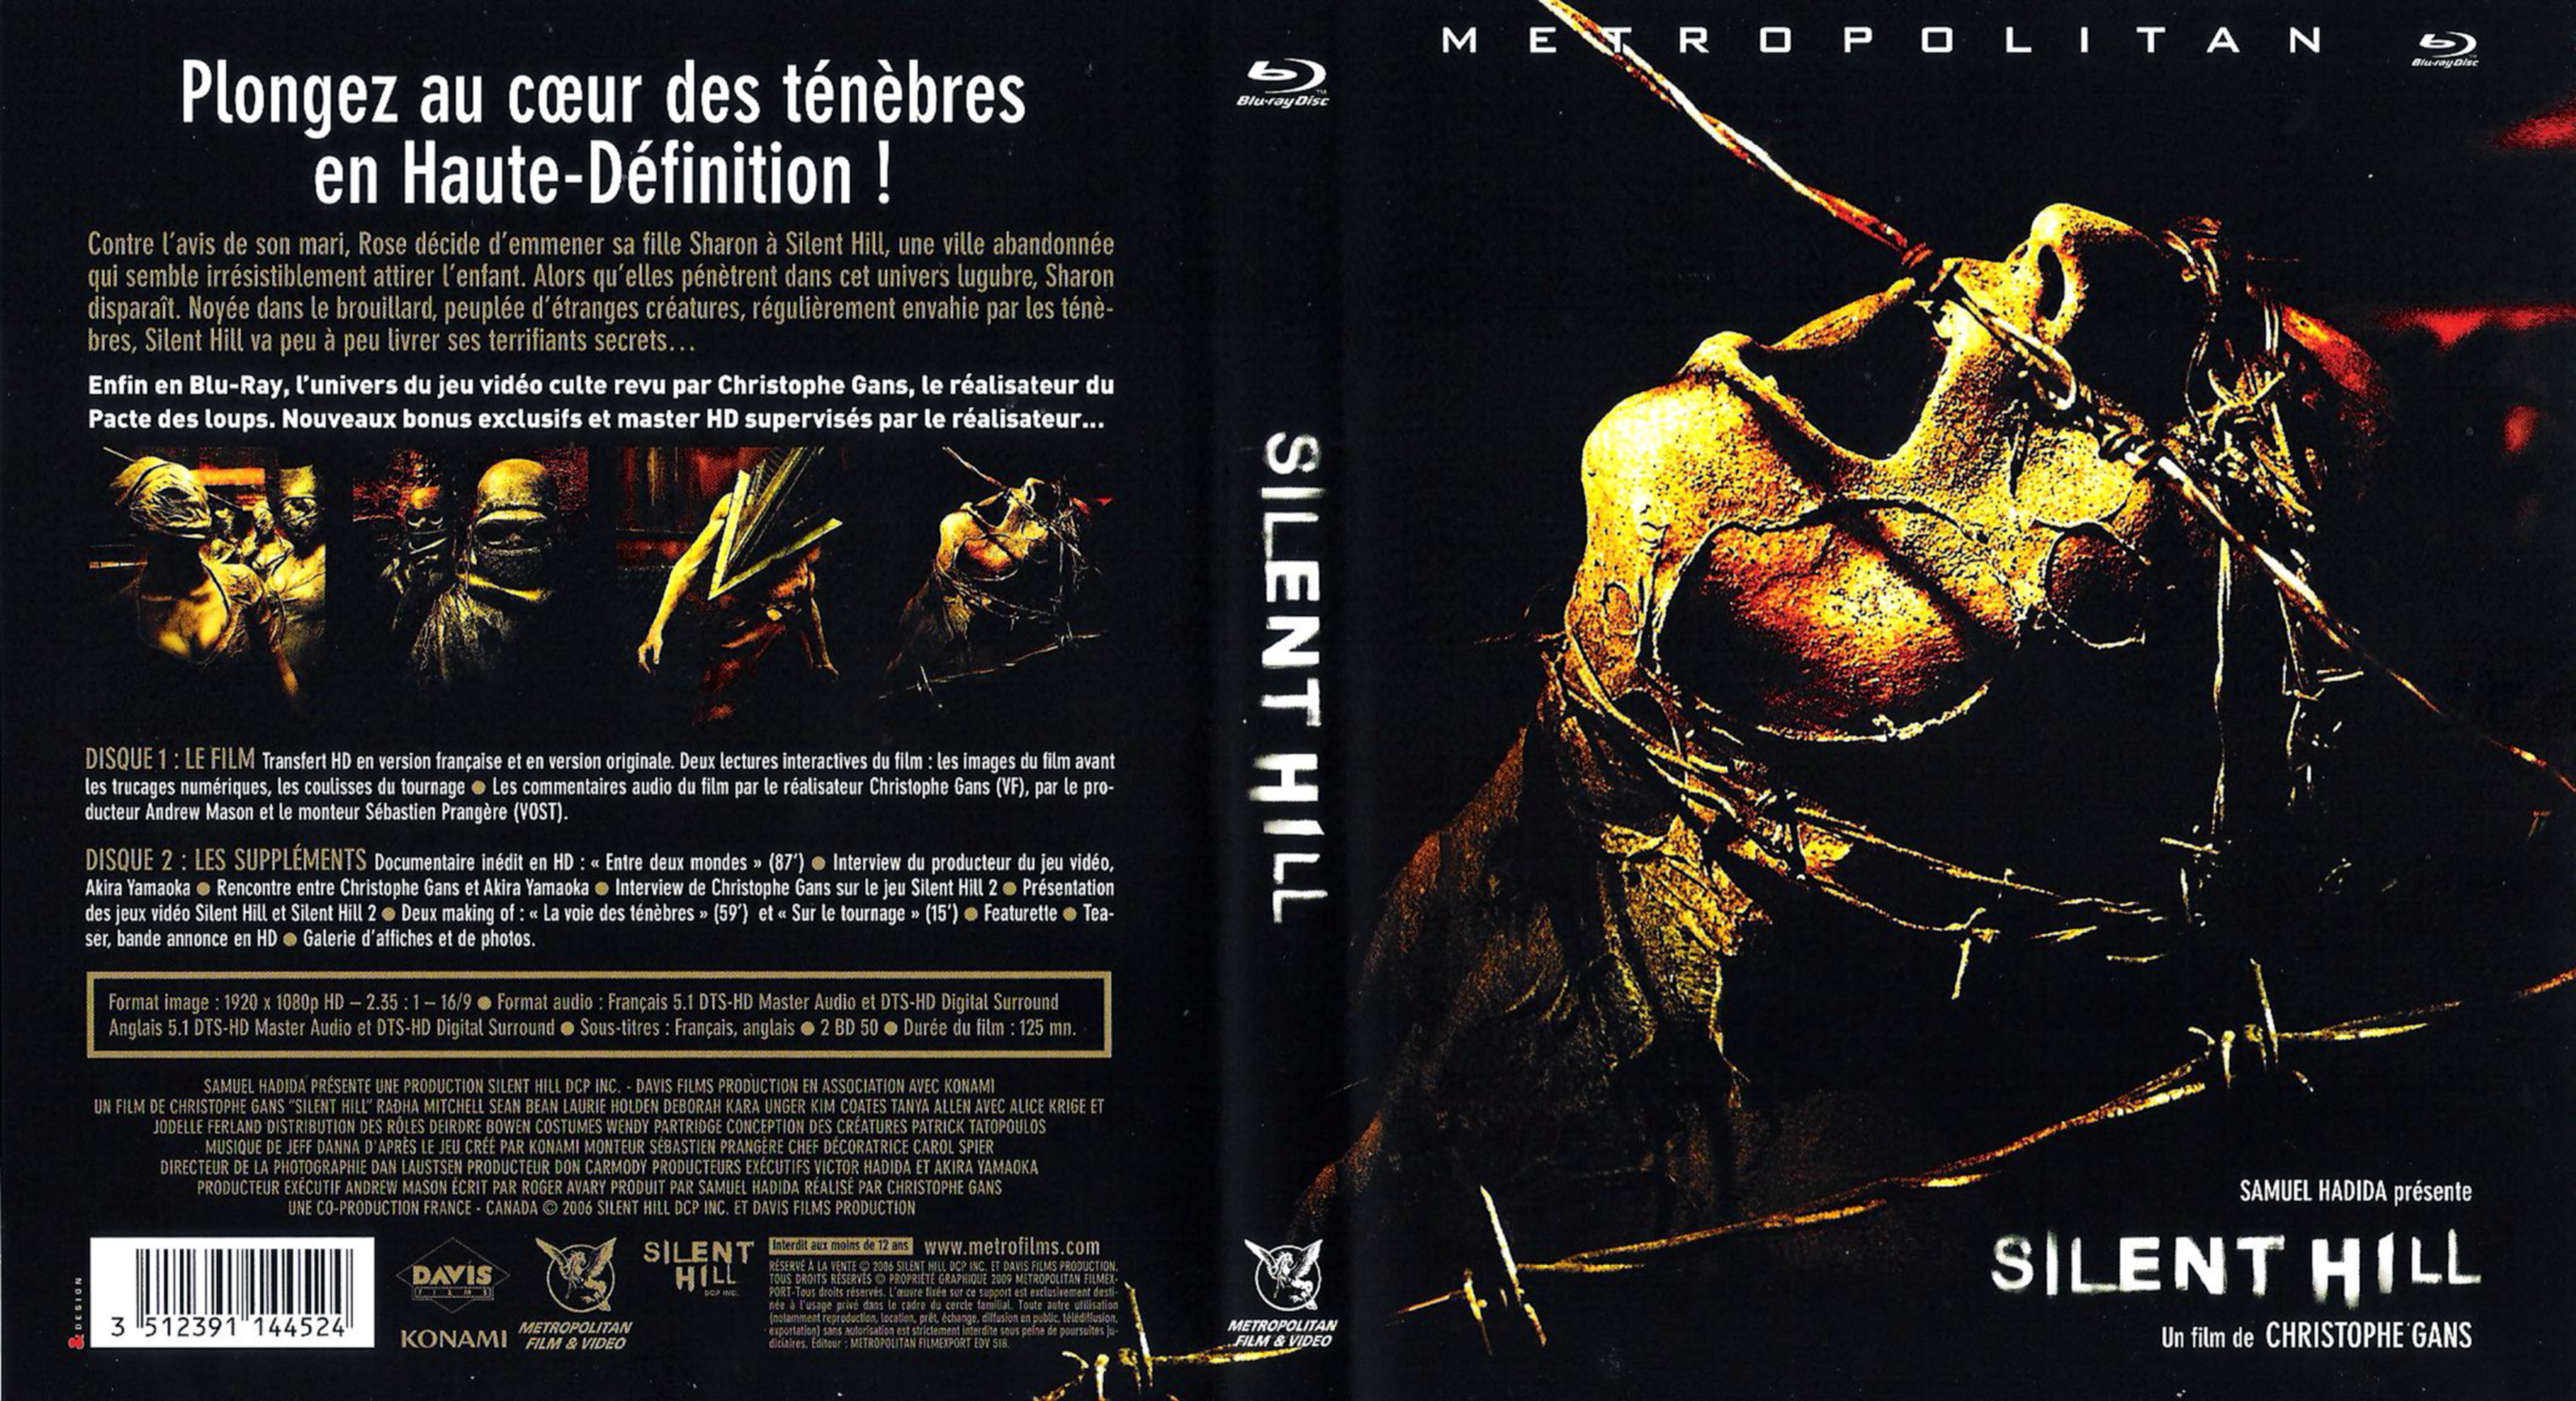 Jaquette DVD Silent Hill (BLU-RAY) v2